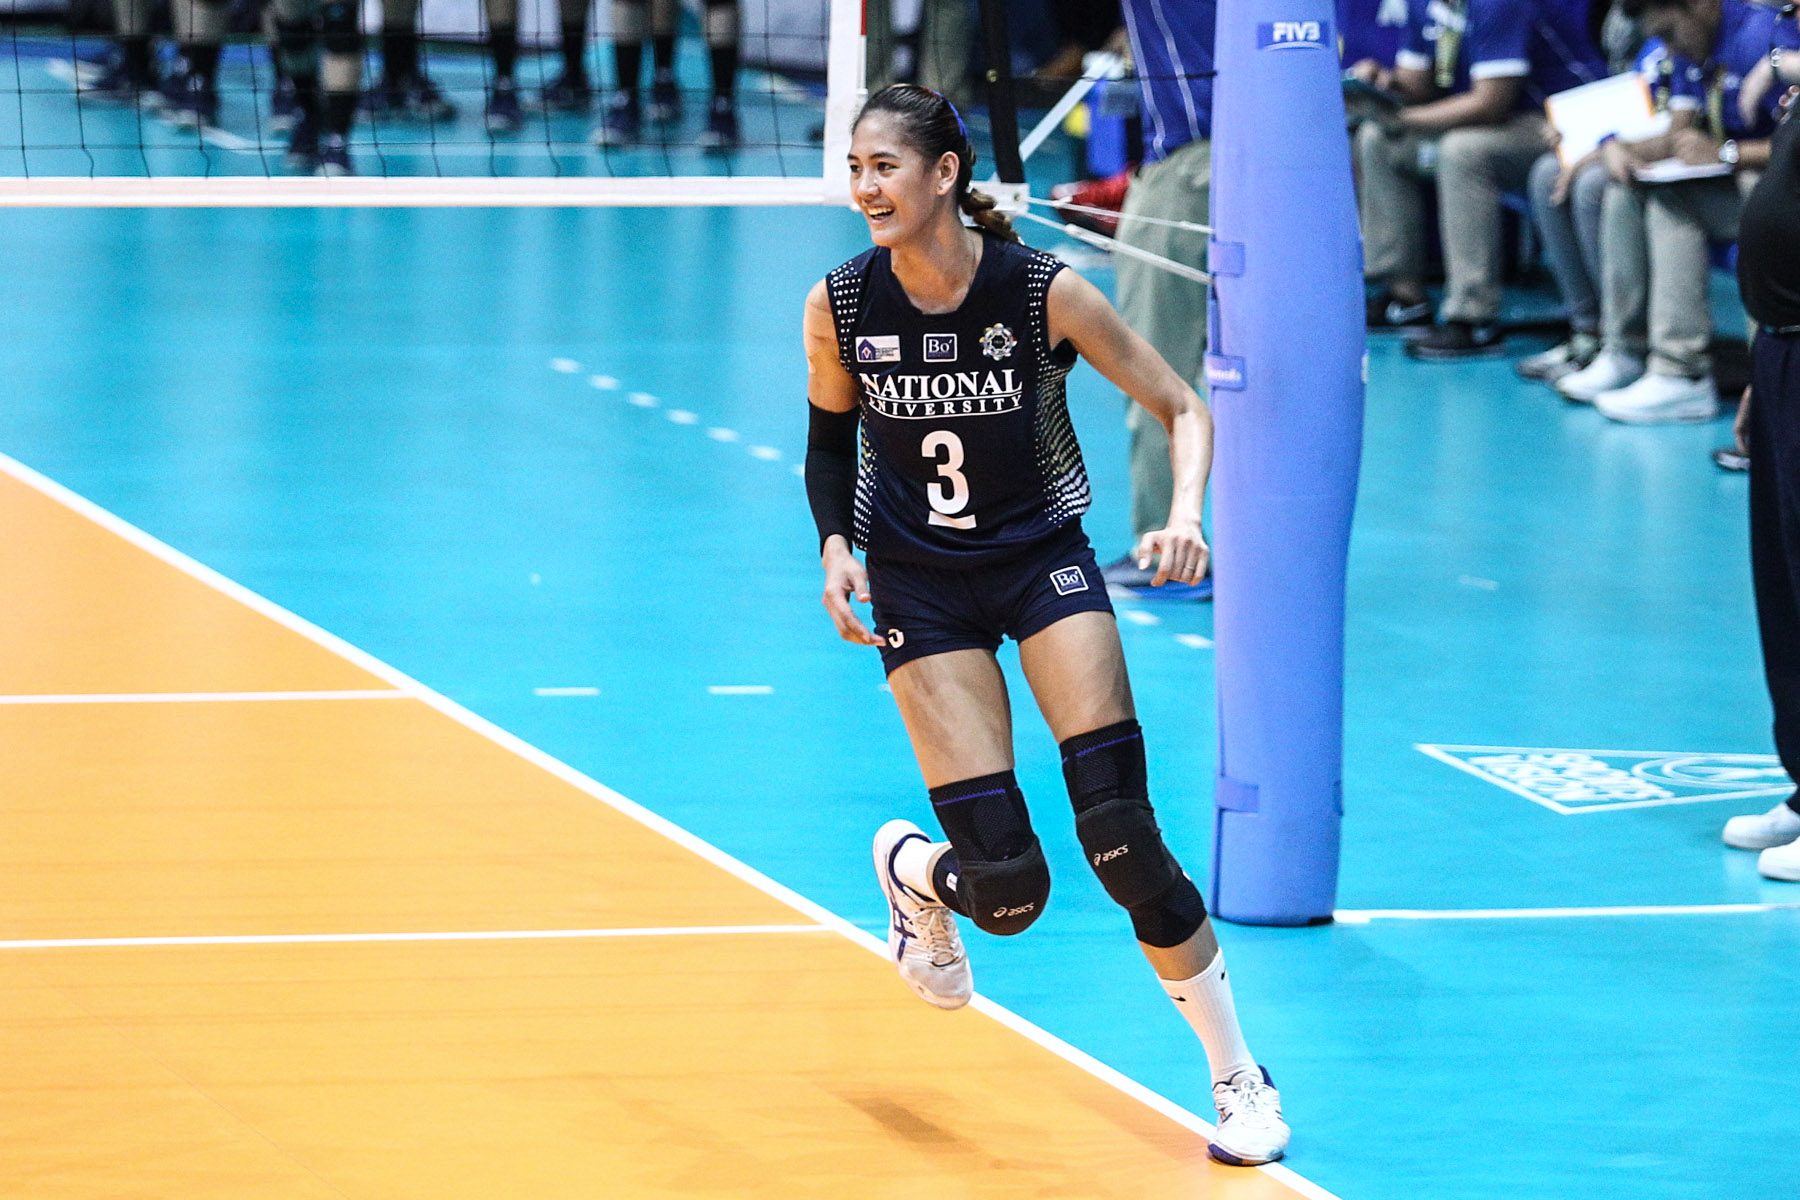 Lady Bulldogs step up to the plate after Gorayeb’s ‘silent suspension’